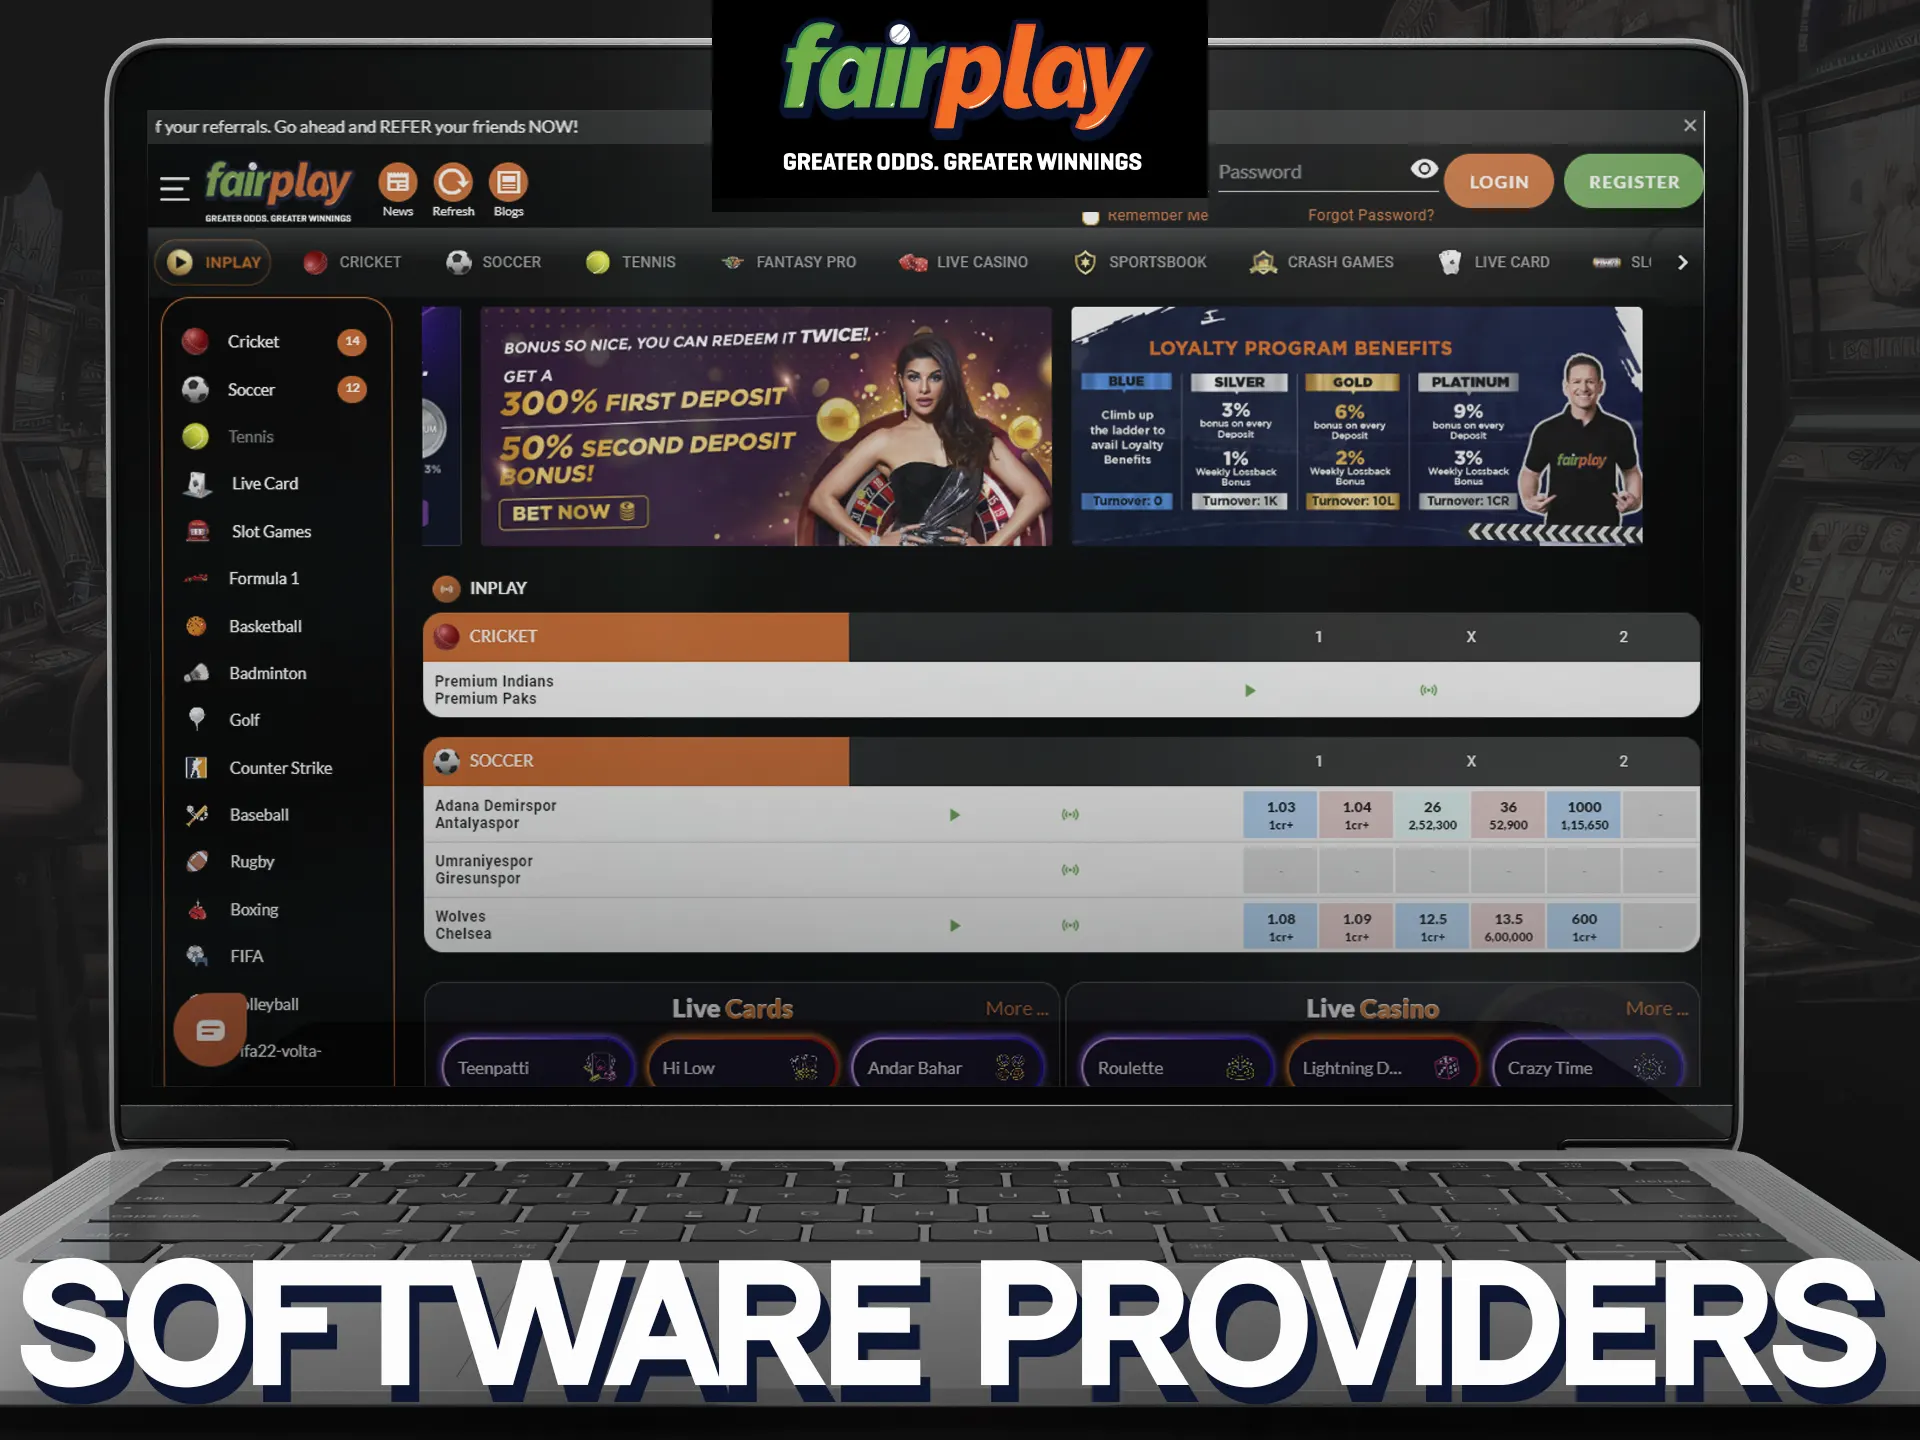 At Fairplay casino you can enjoy casino games from a big diversity of the gaming providers.